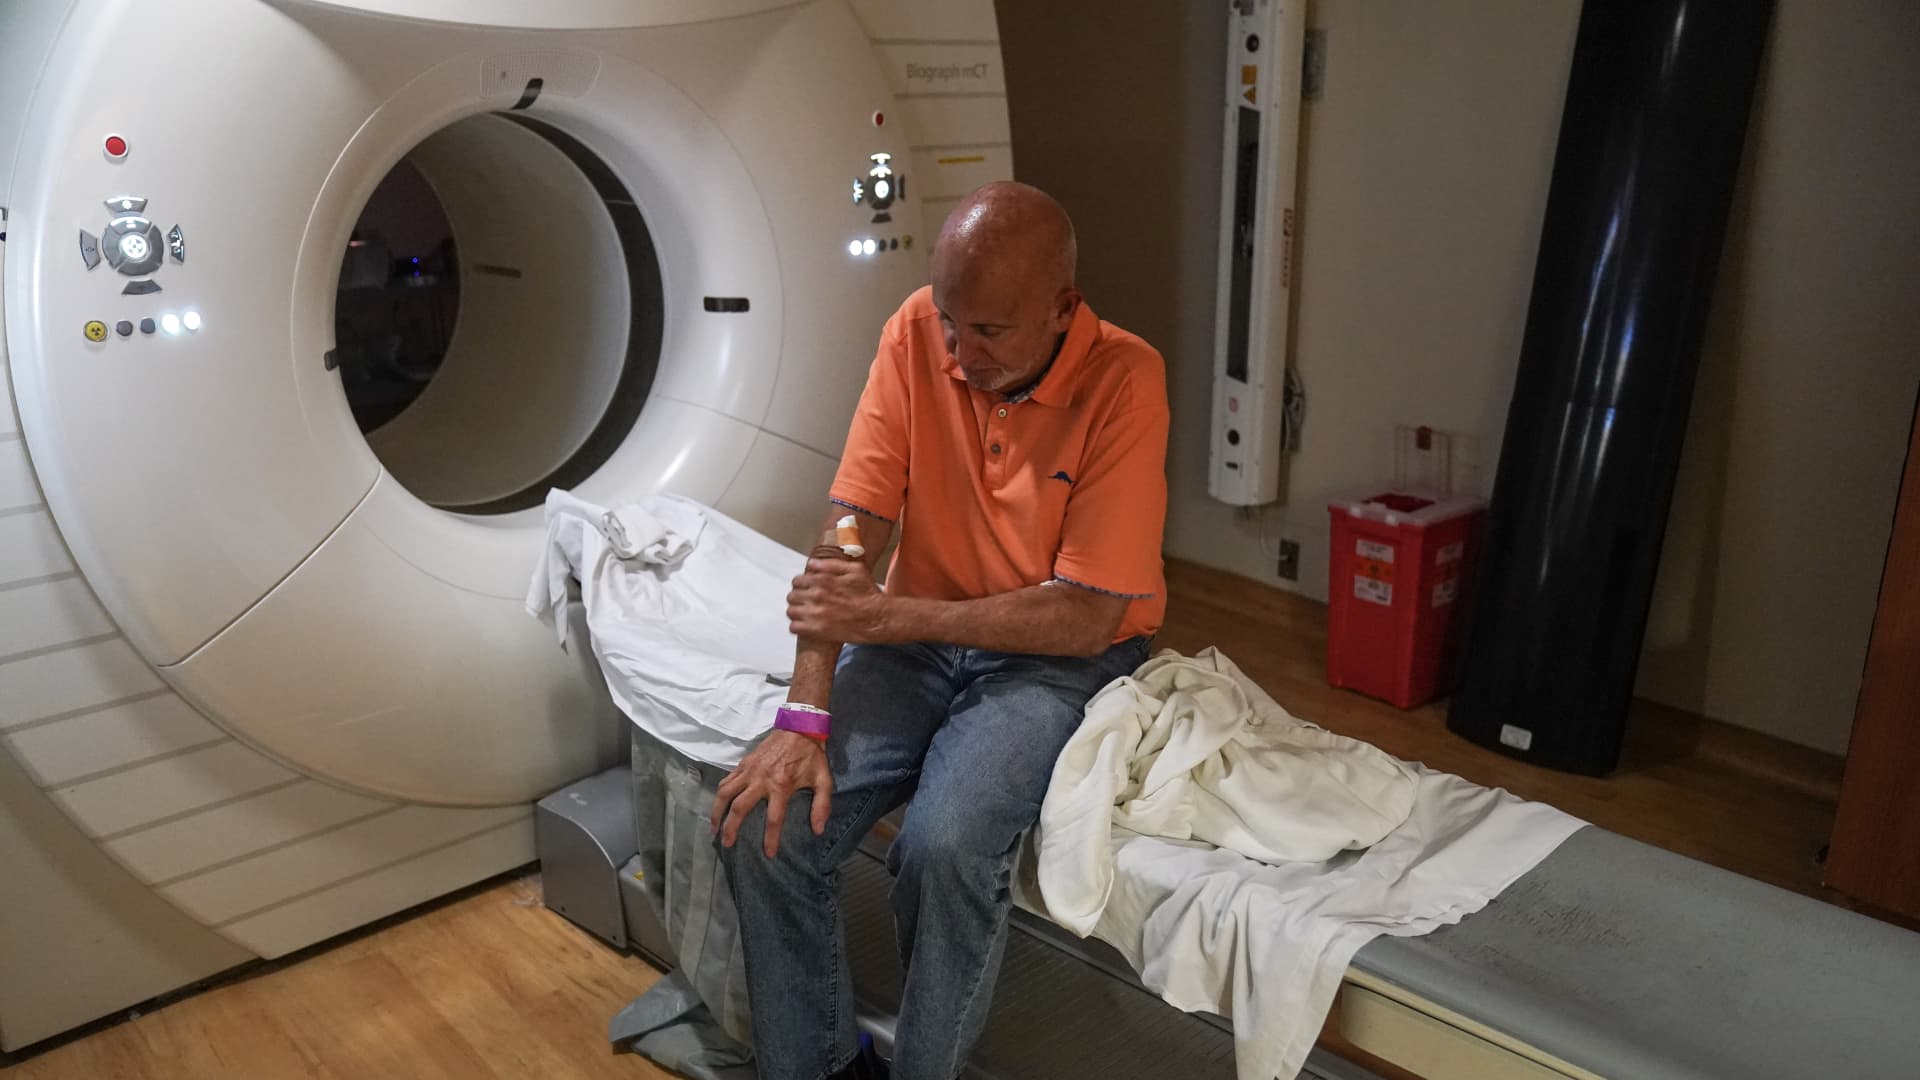 Medicare proposes removing limit on PET scans used to help diagnose Alzheimer’s disease